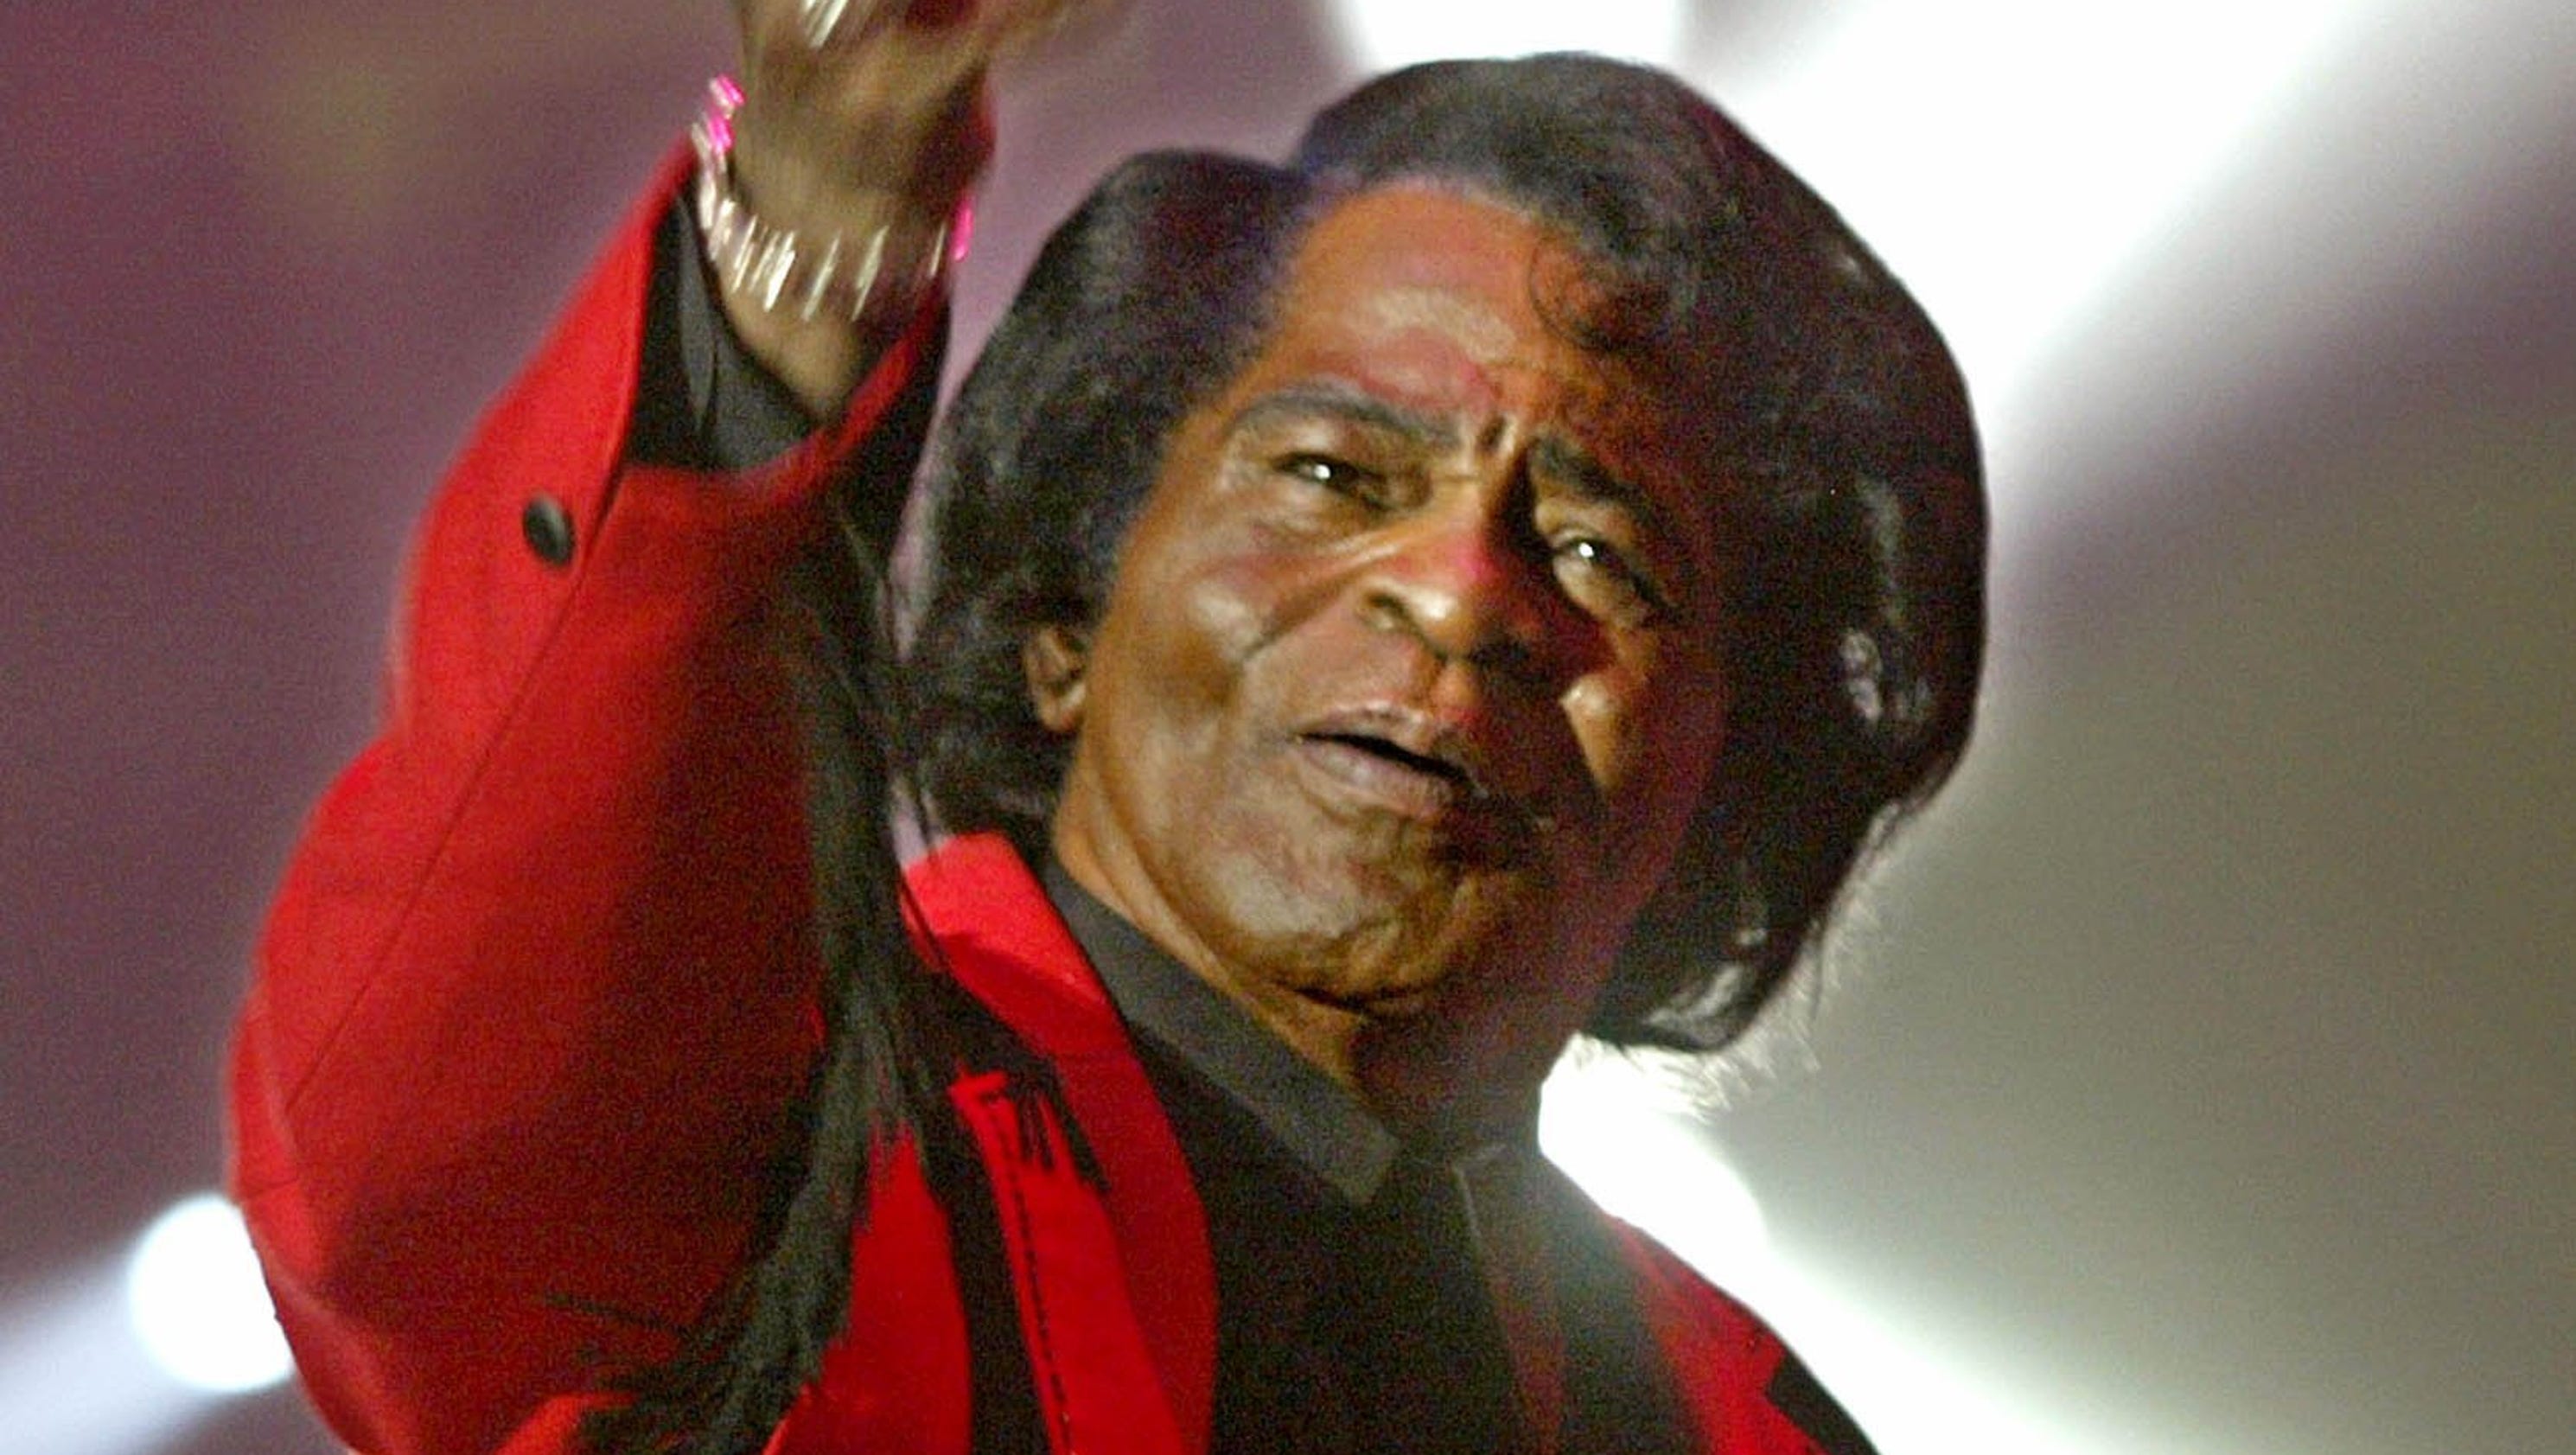 History: James Brown brings movement to the civil rights movement